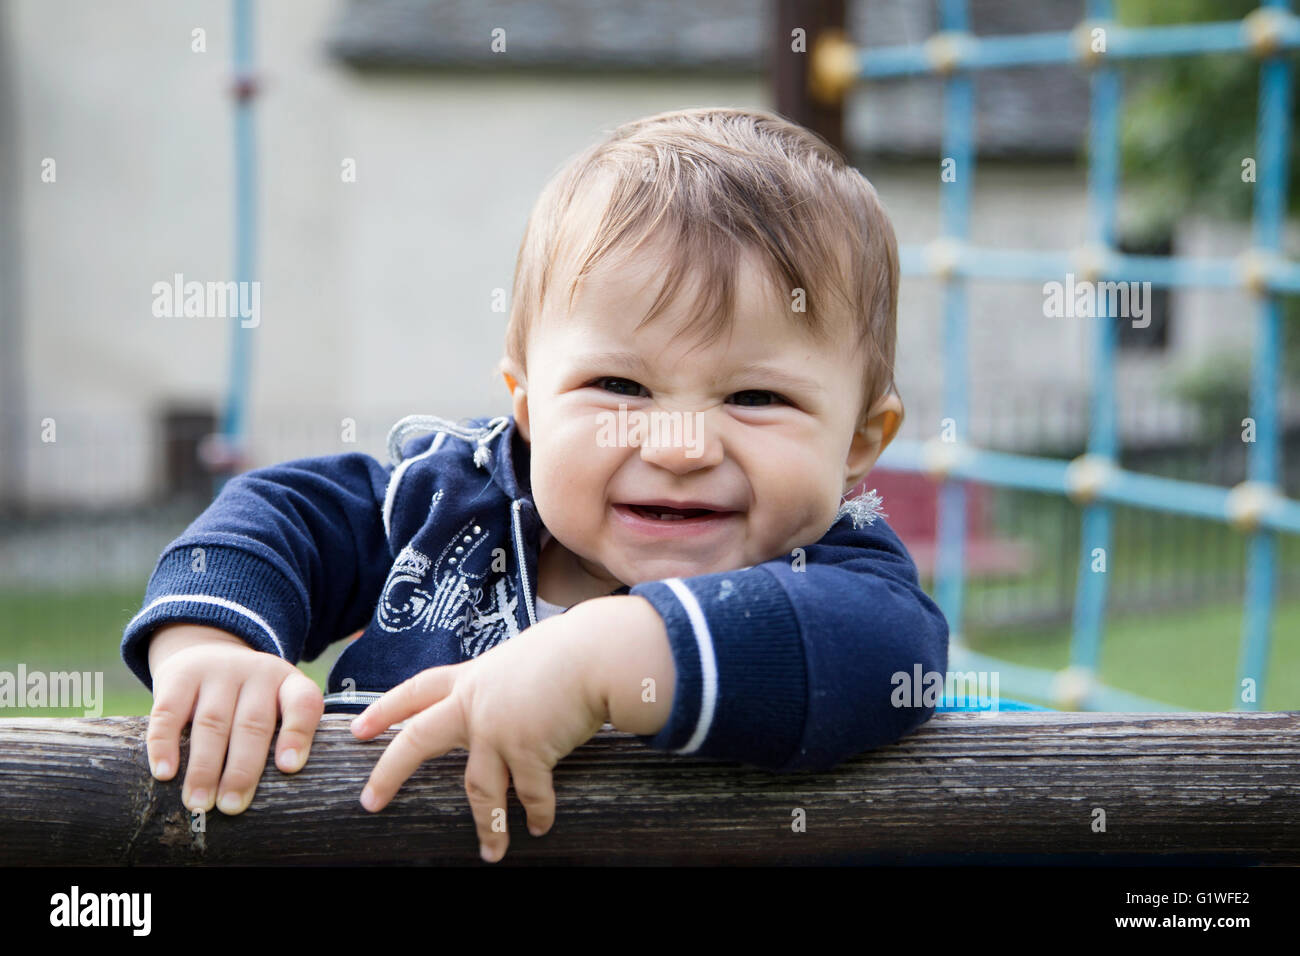 One year old baby girl climbing a wooden fence in a playground Stock Photo